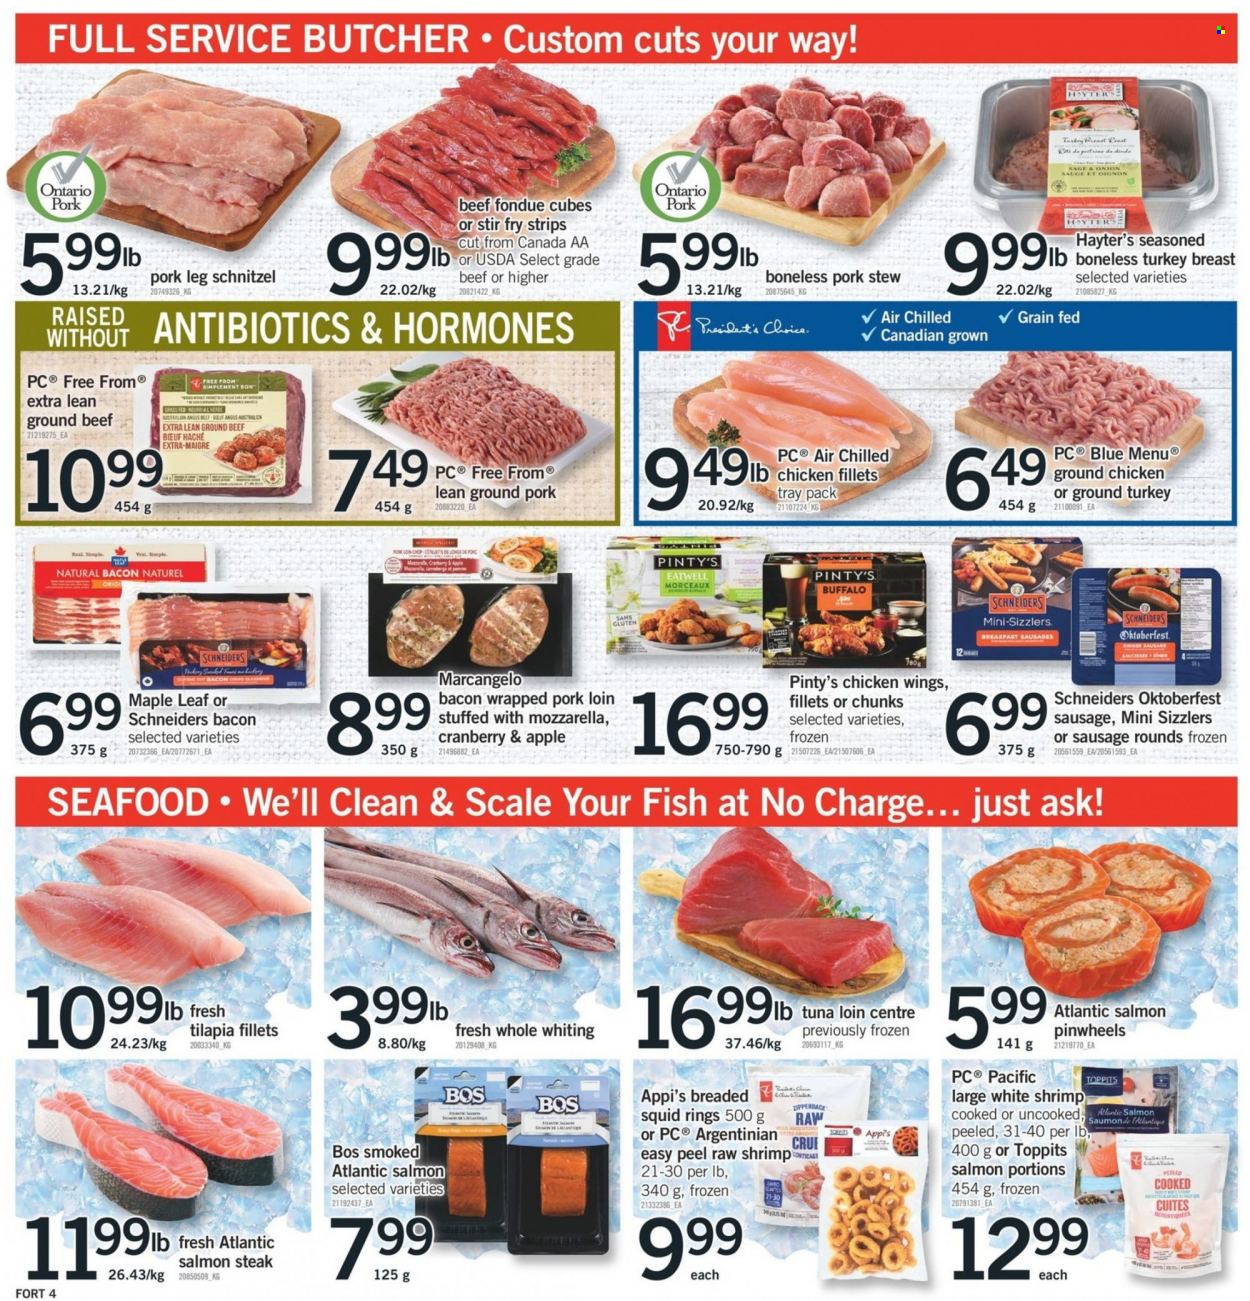 thumbnail - Fortinos Flyer - January 26, 2023 - February 01, 2023 - Sales products - scale, salmon, squid, tilapia, tuna, seafood, fish, shrimps, whiting, squid rings, schnitzel, bacon, sausage, chicken wings, strips, ground chicken, ground turkey, turkey breast, stir fry strips, chicken, turkey, beef meat, ground beef, ground pork, pork loin, pork meat, pork leg, steak. Page 5.